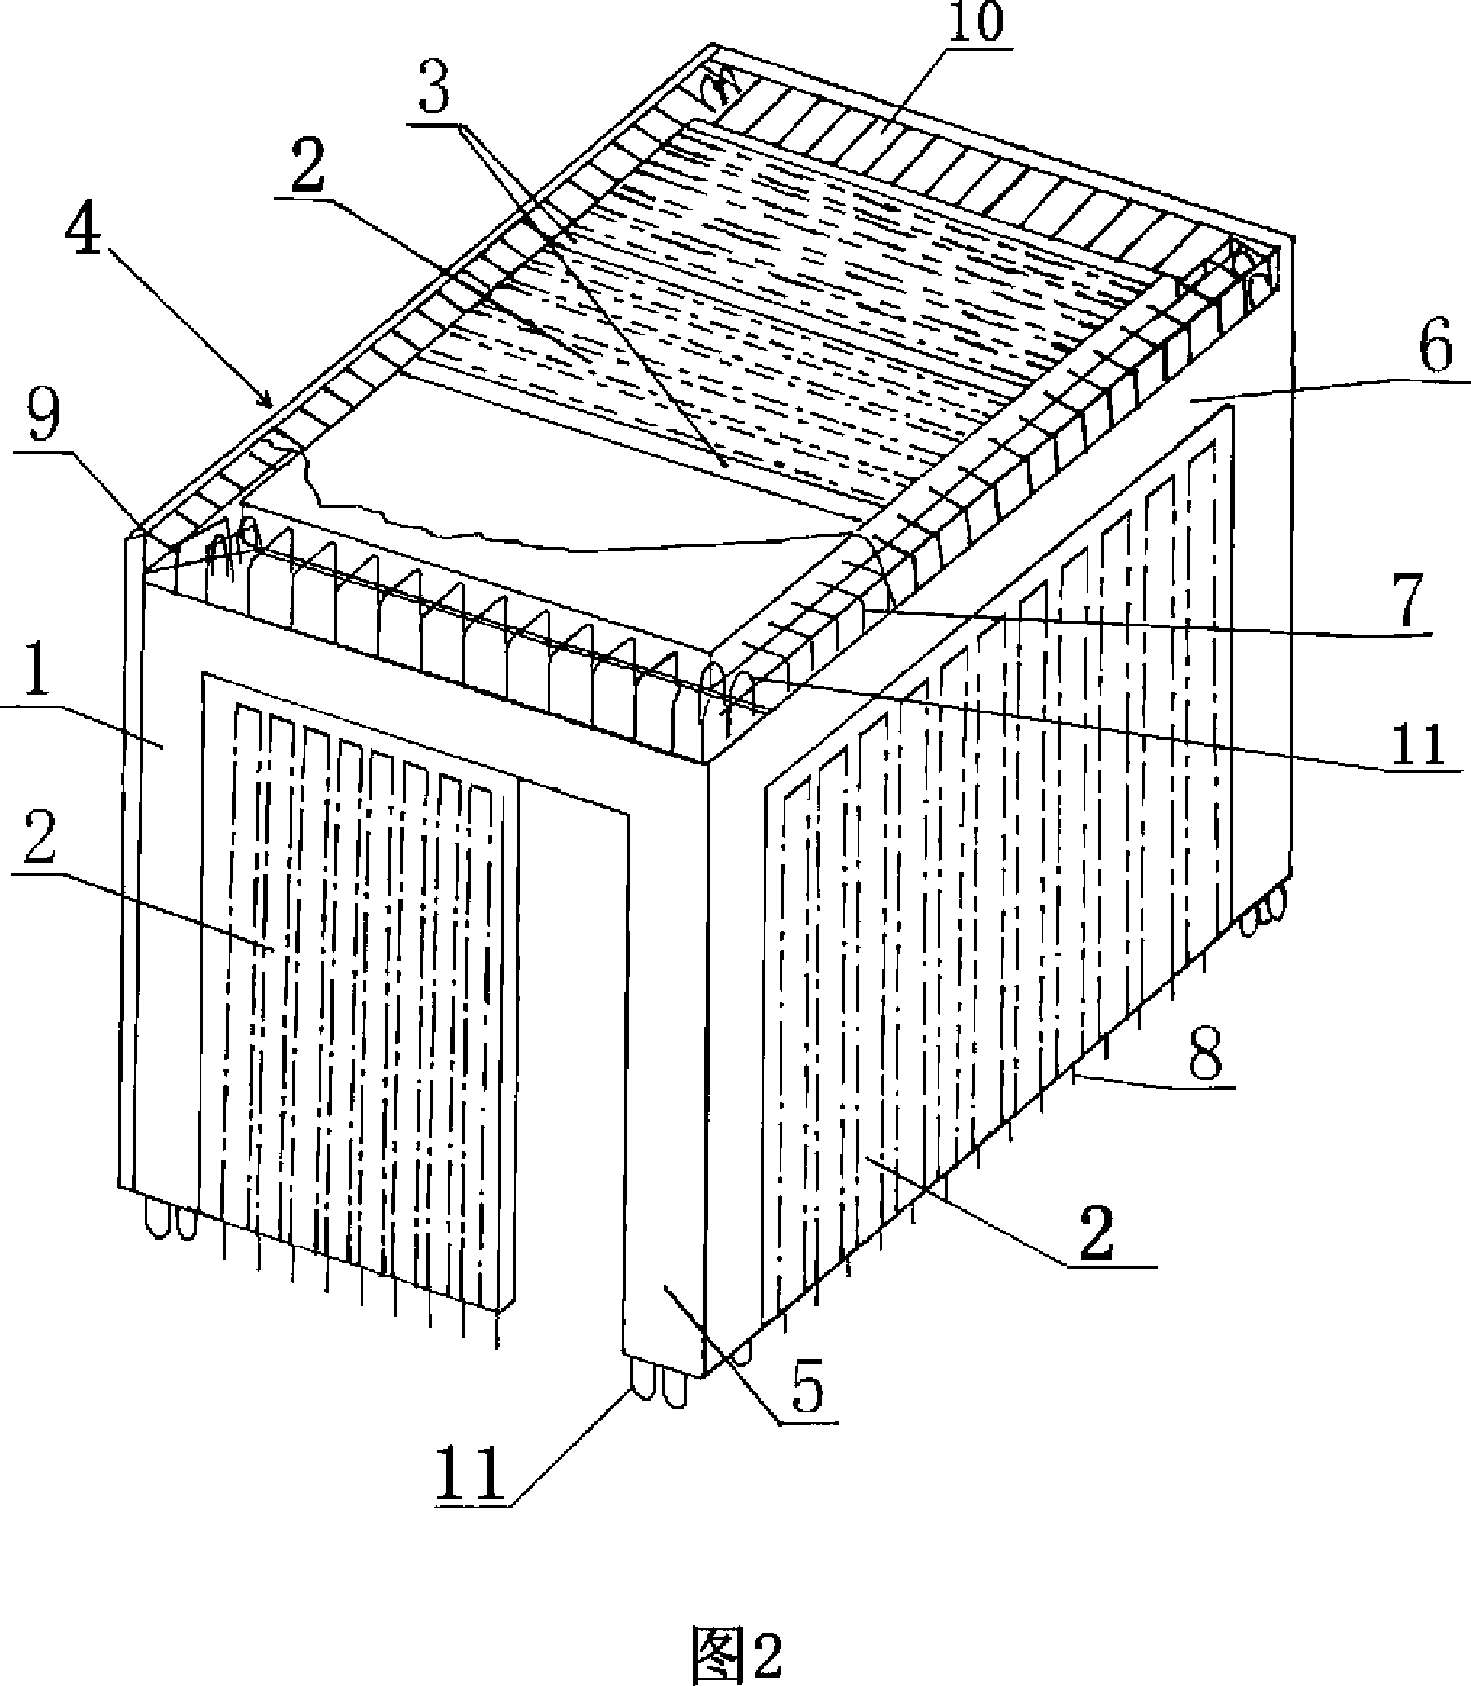 Porous light concrete and common concrete composite member, method for producing same, and building therefrom